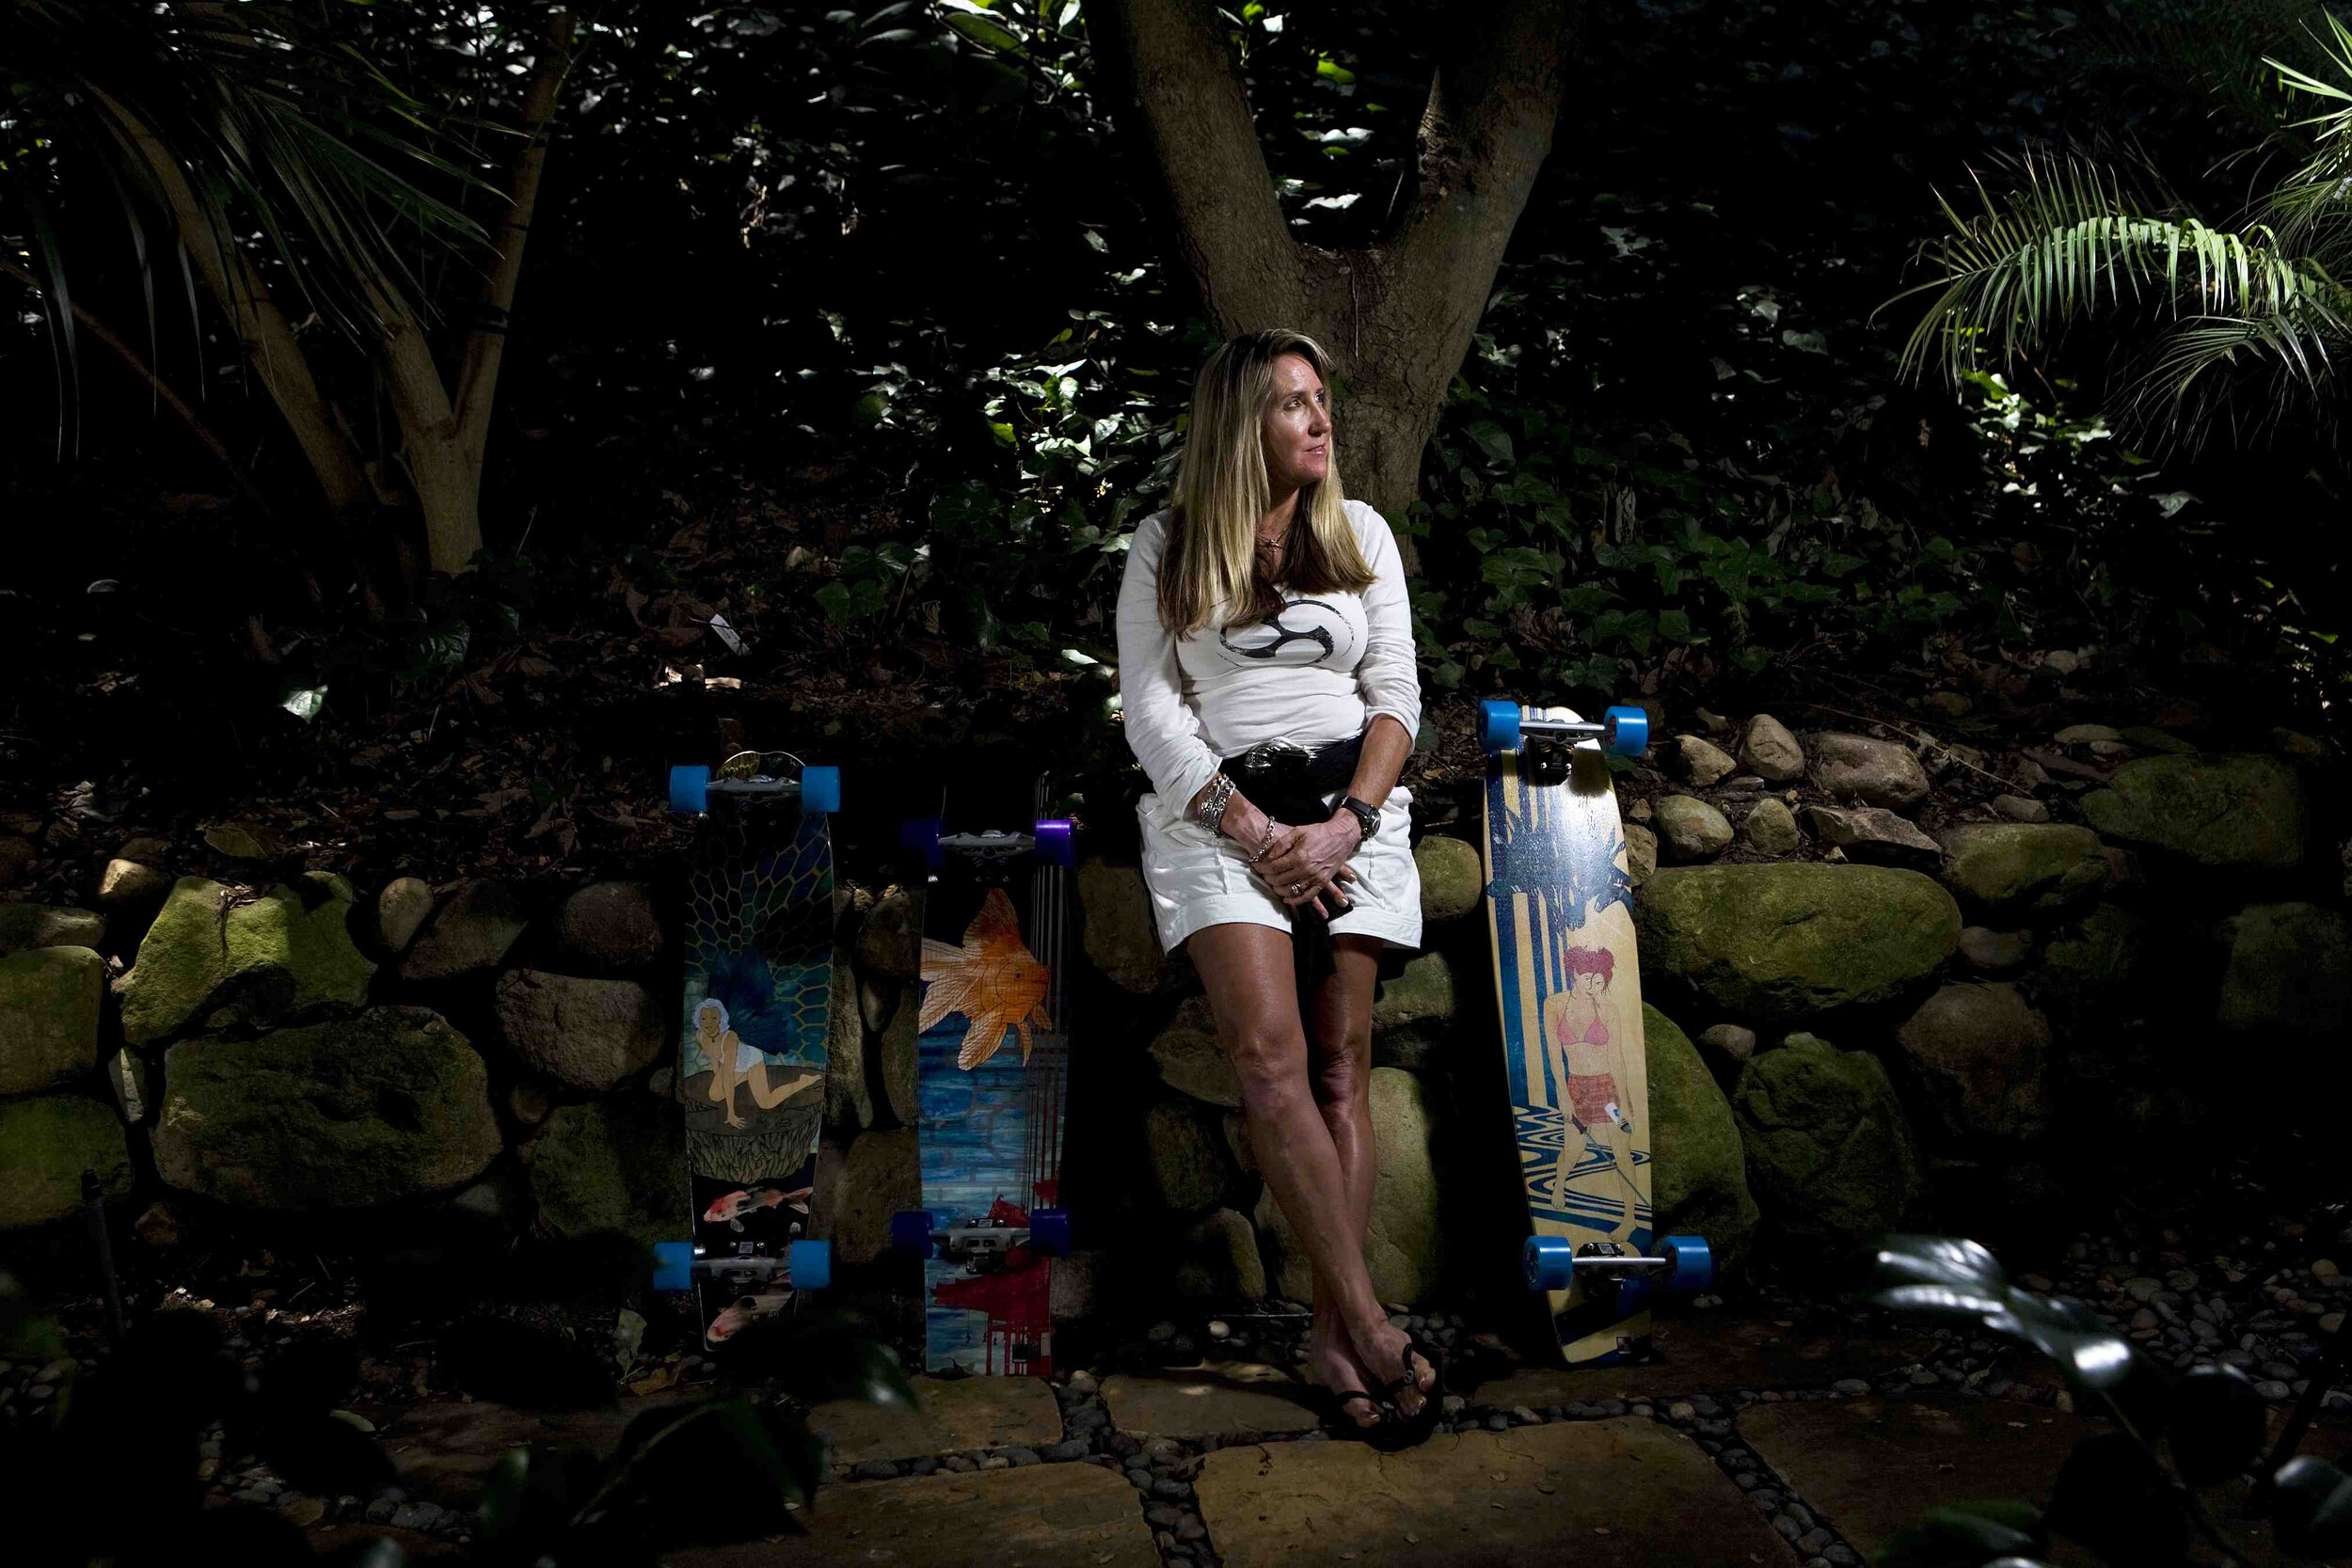 Laura Thornhill put the B in 70s Babe - an inspiration for many girl skaters to come.